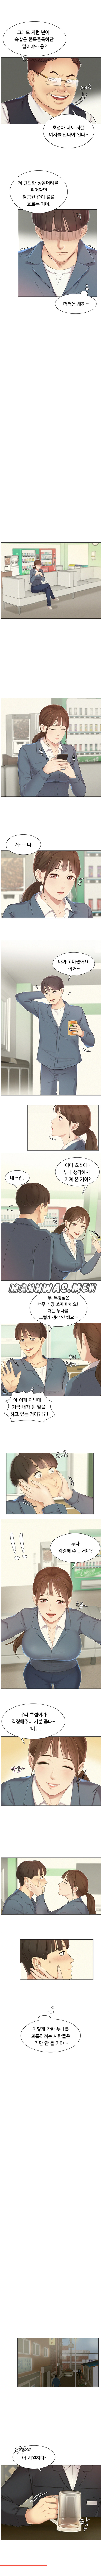 Accountancy Raw - Chapter 1 Page 4